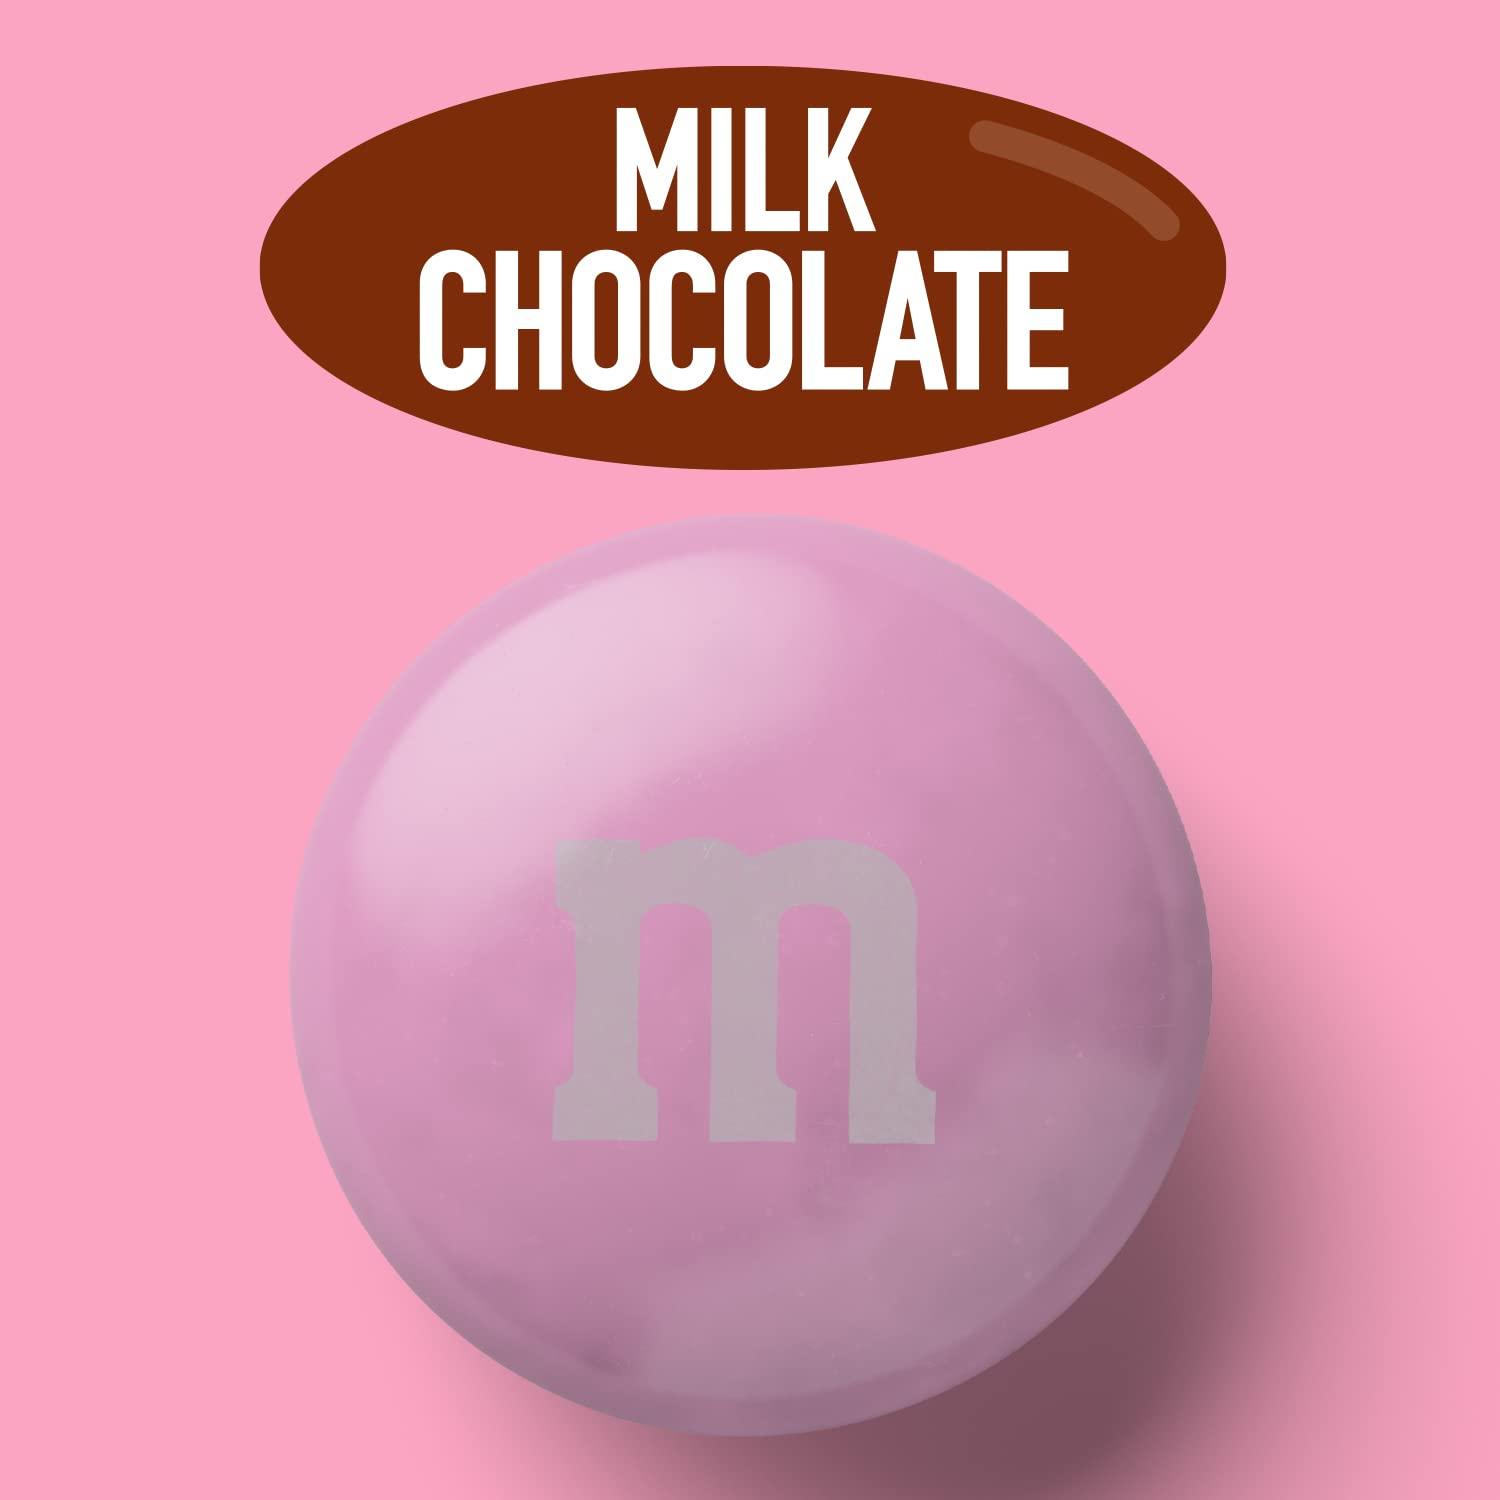 M&MS Milk Chocolate Pink Candy - 2lbs of Bulk Candy in Resealable